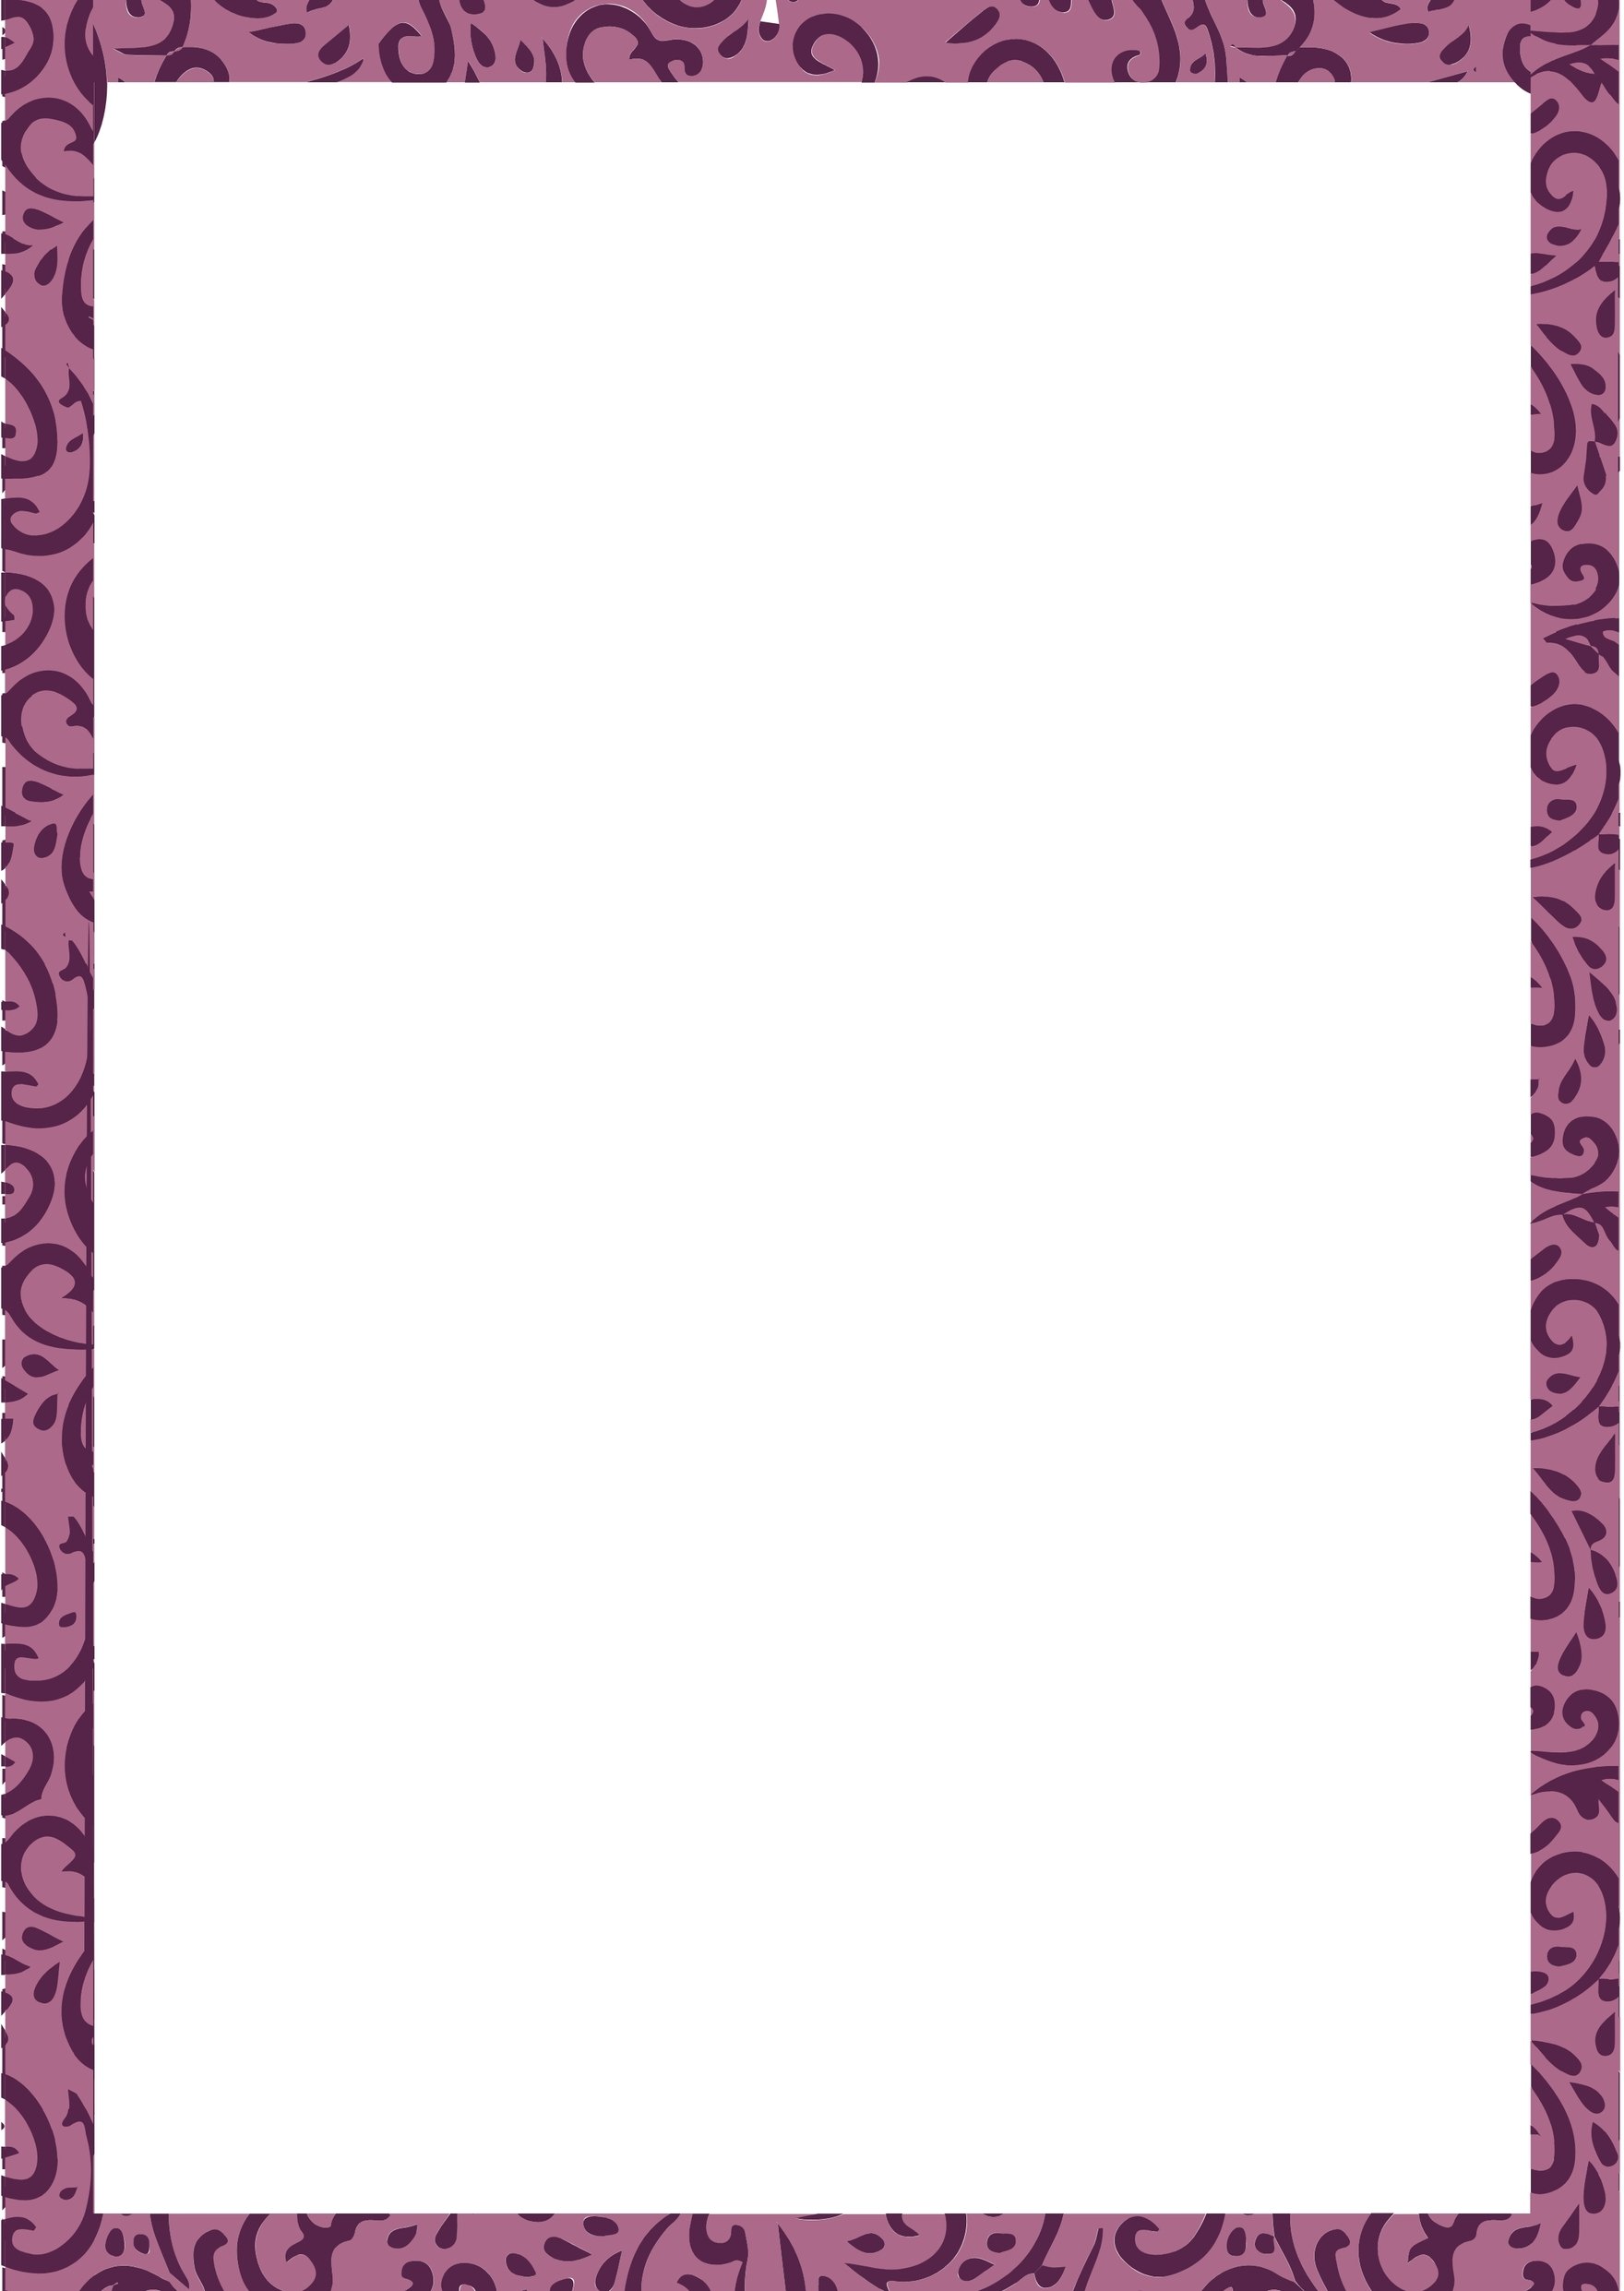 Frame Page Border Template